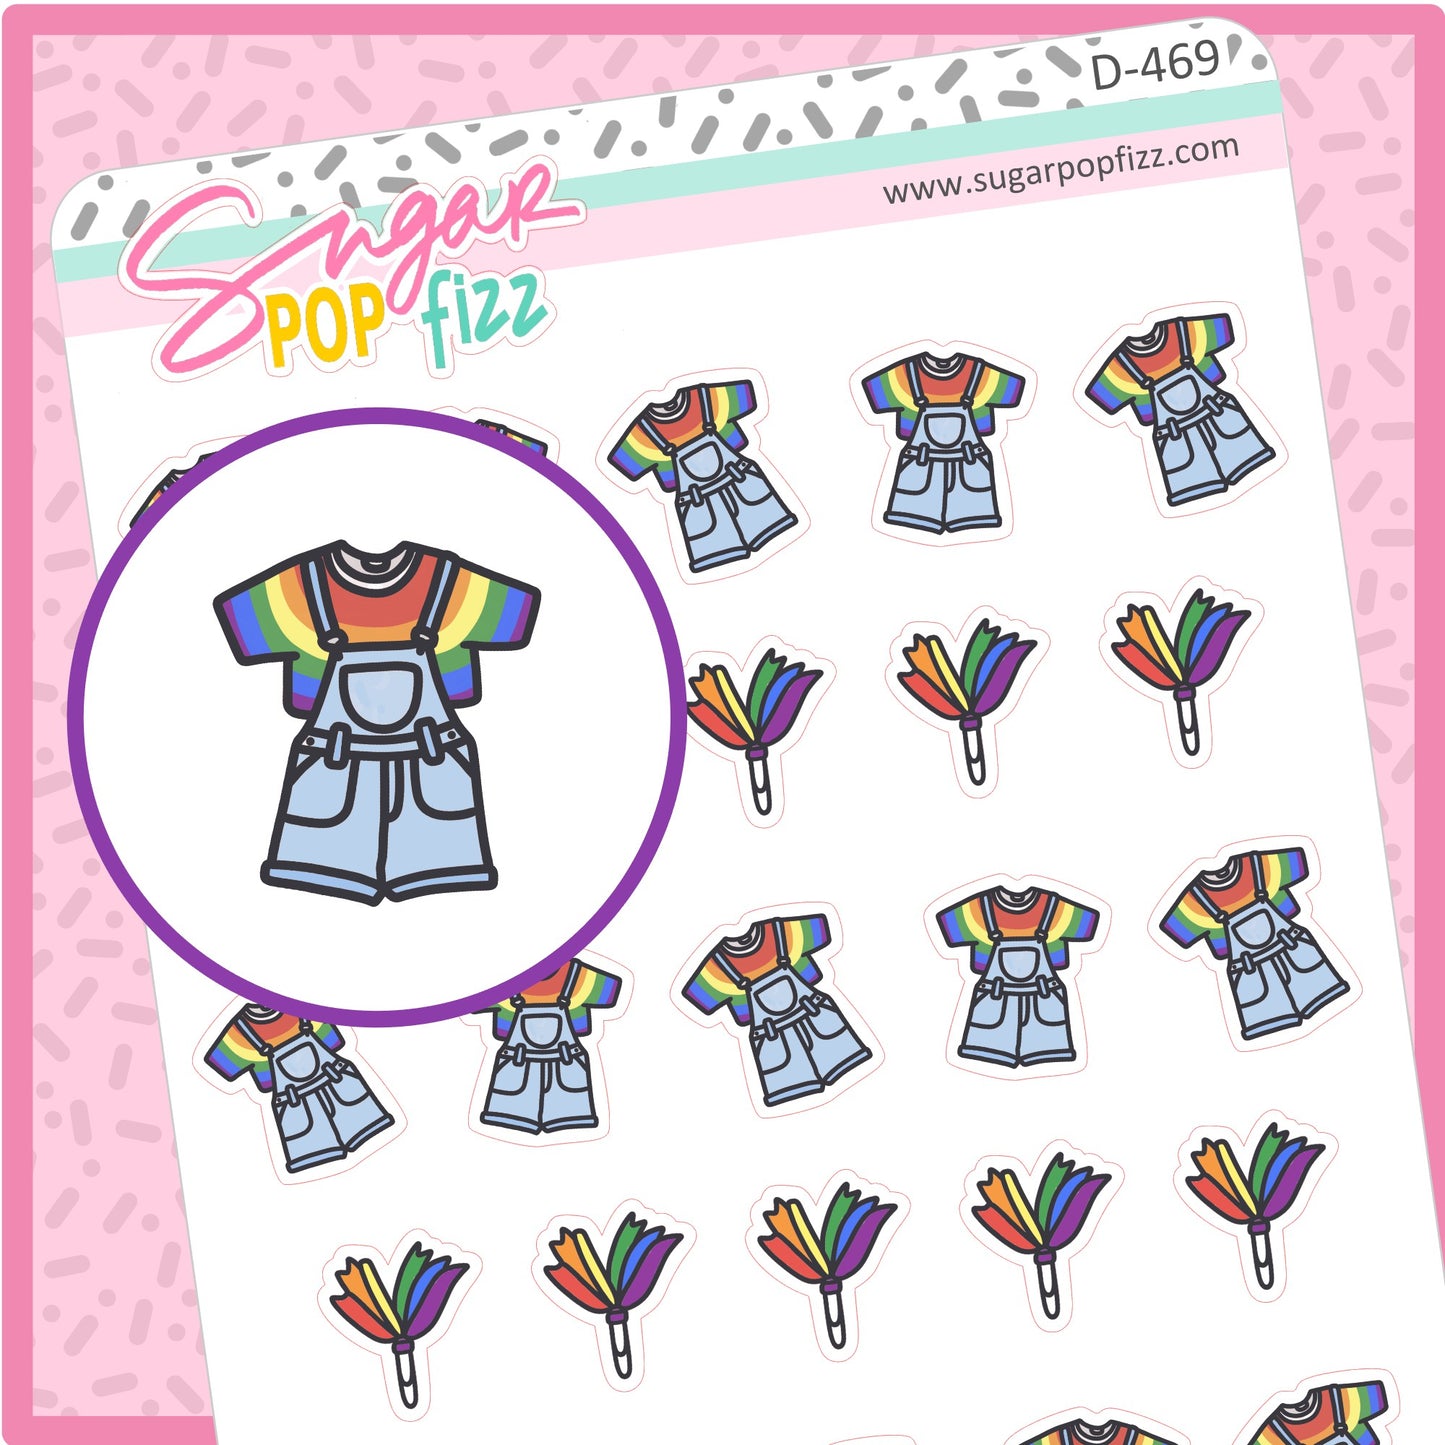 Rainbow Outfit Doodle Stickers - D469